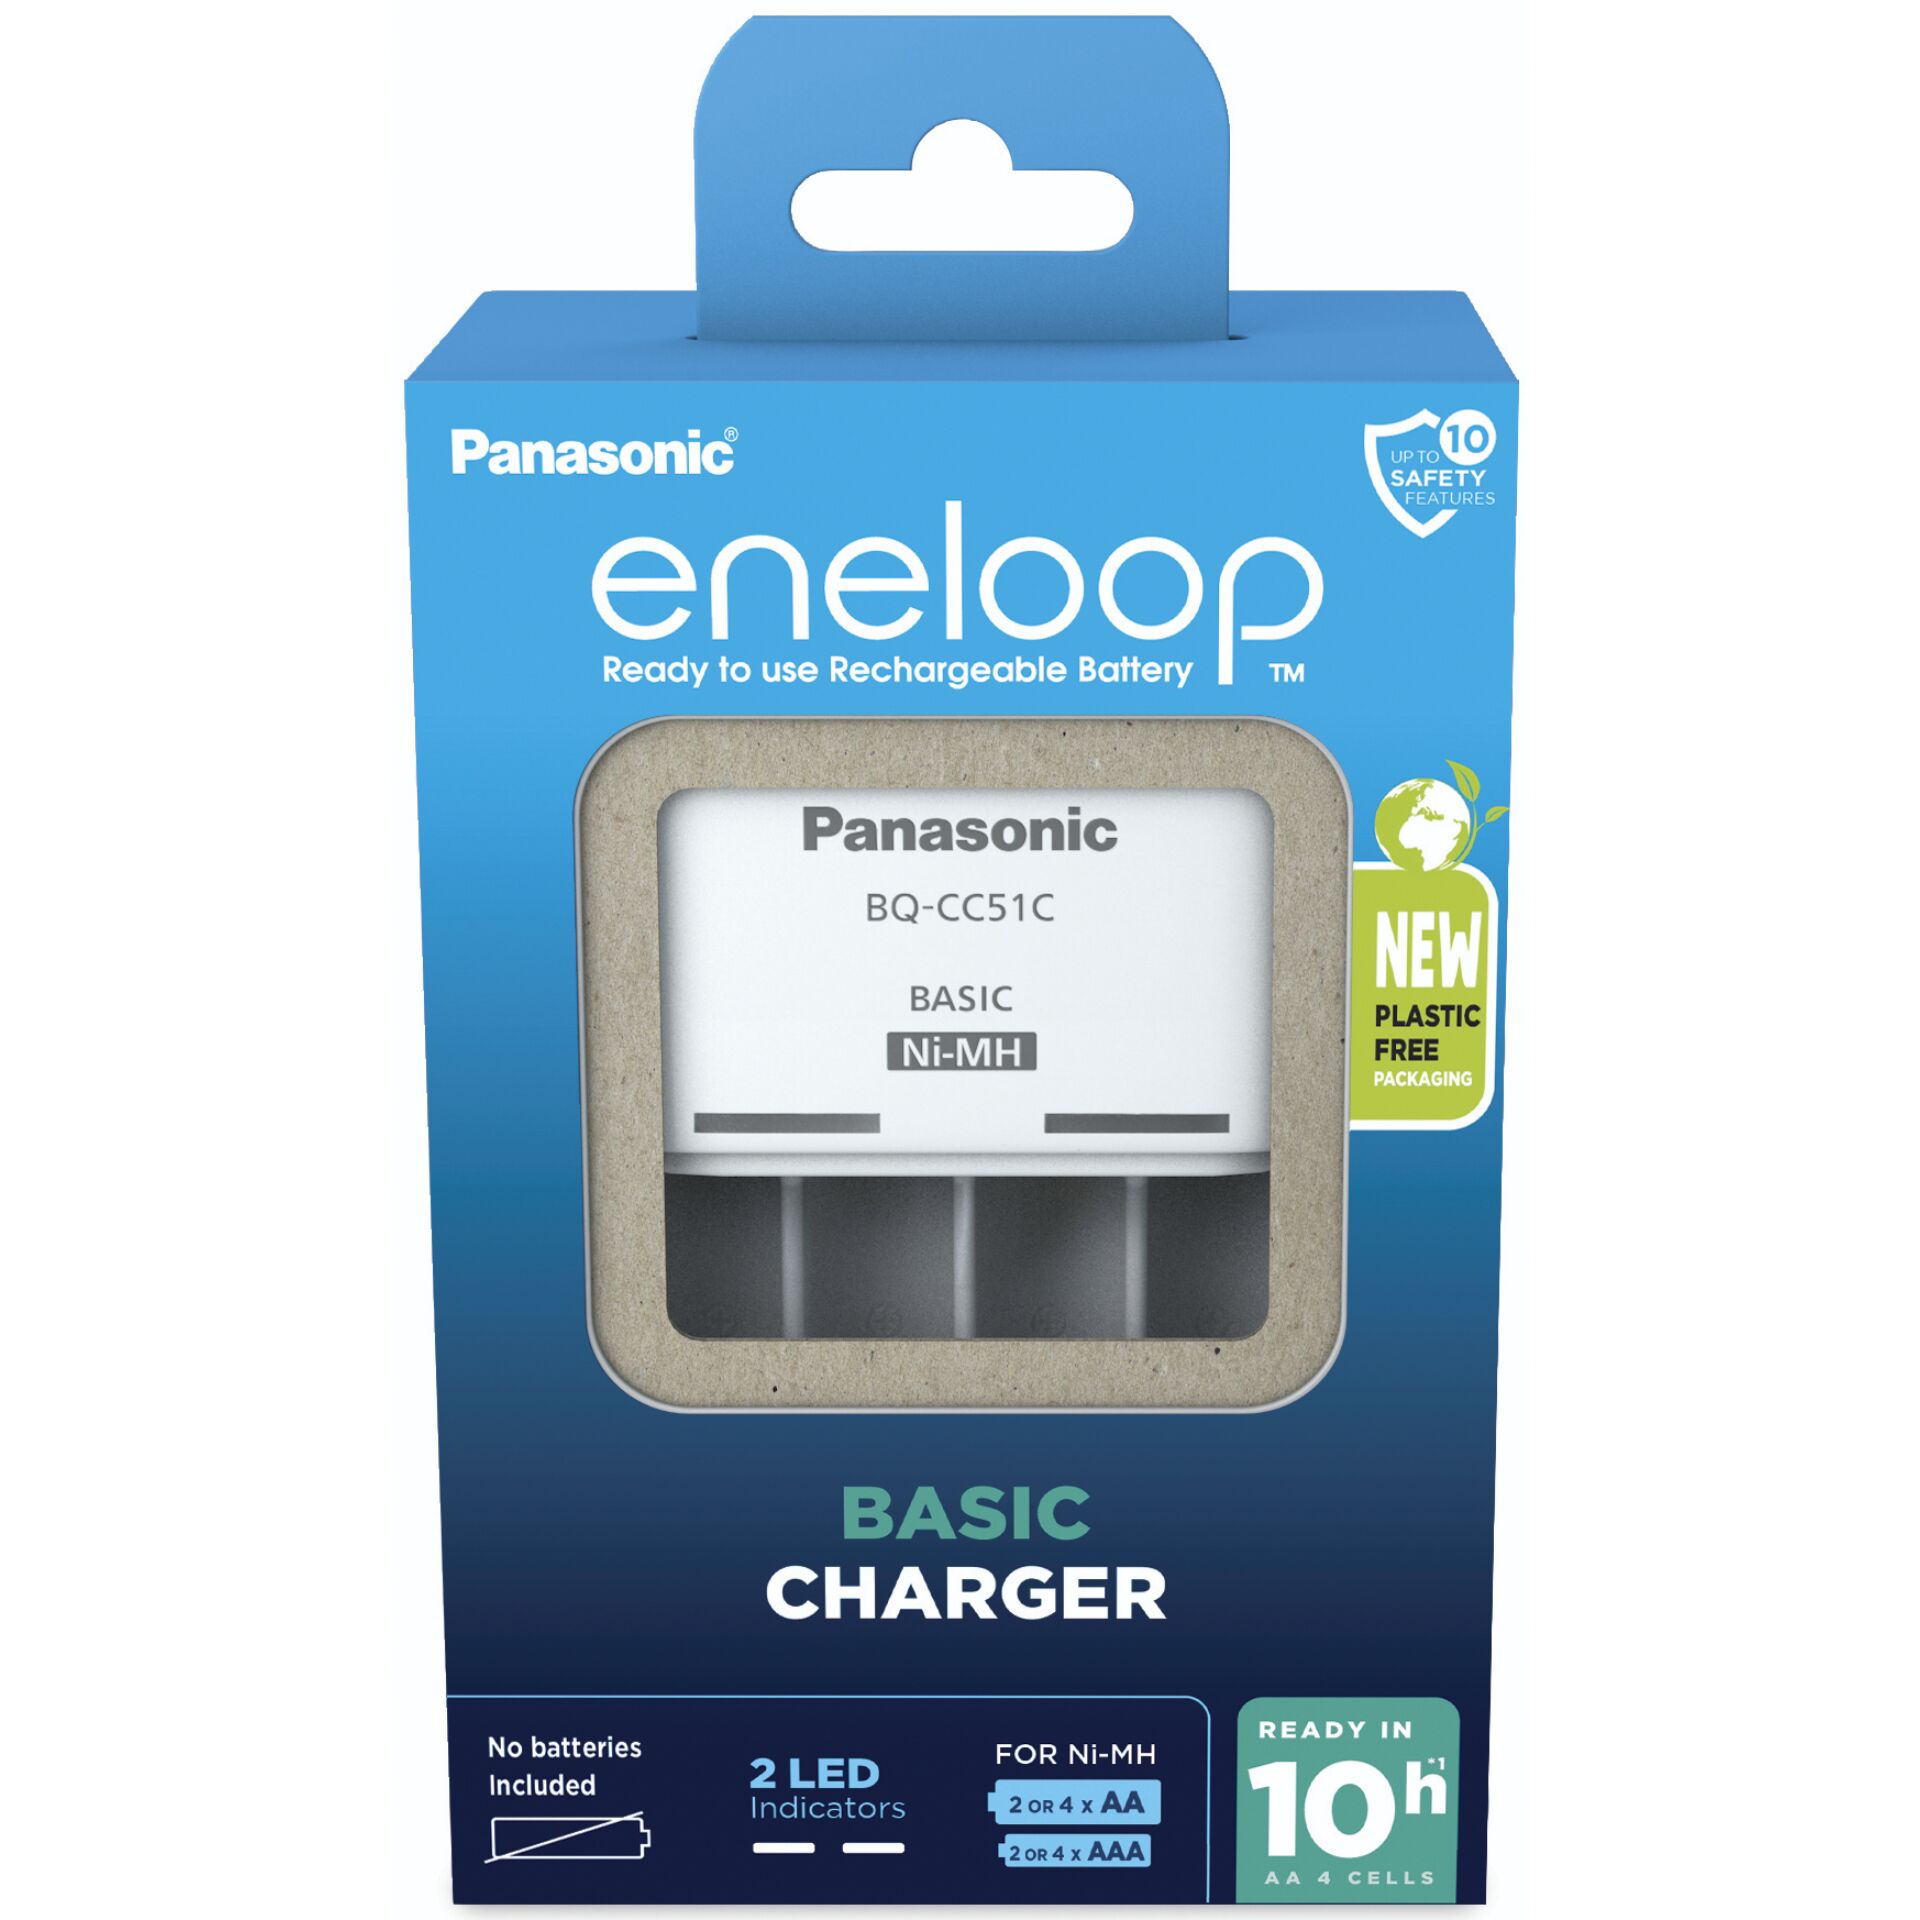 Panasonic Eneloop Basic Charger BQ-CC51E (Batteries Not Included)